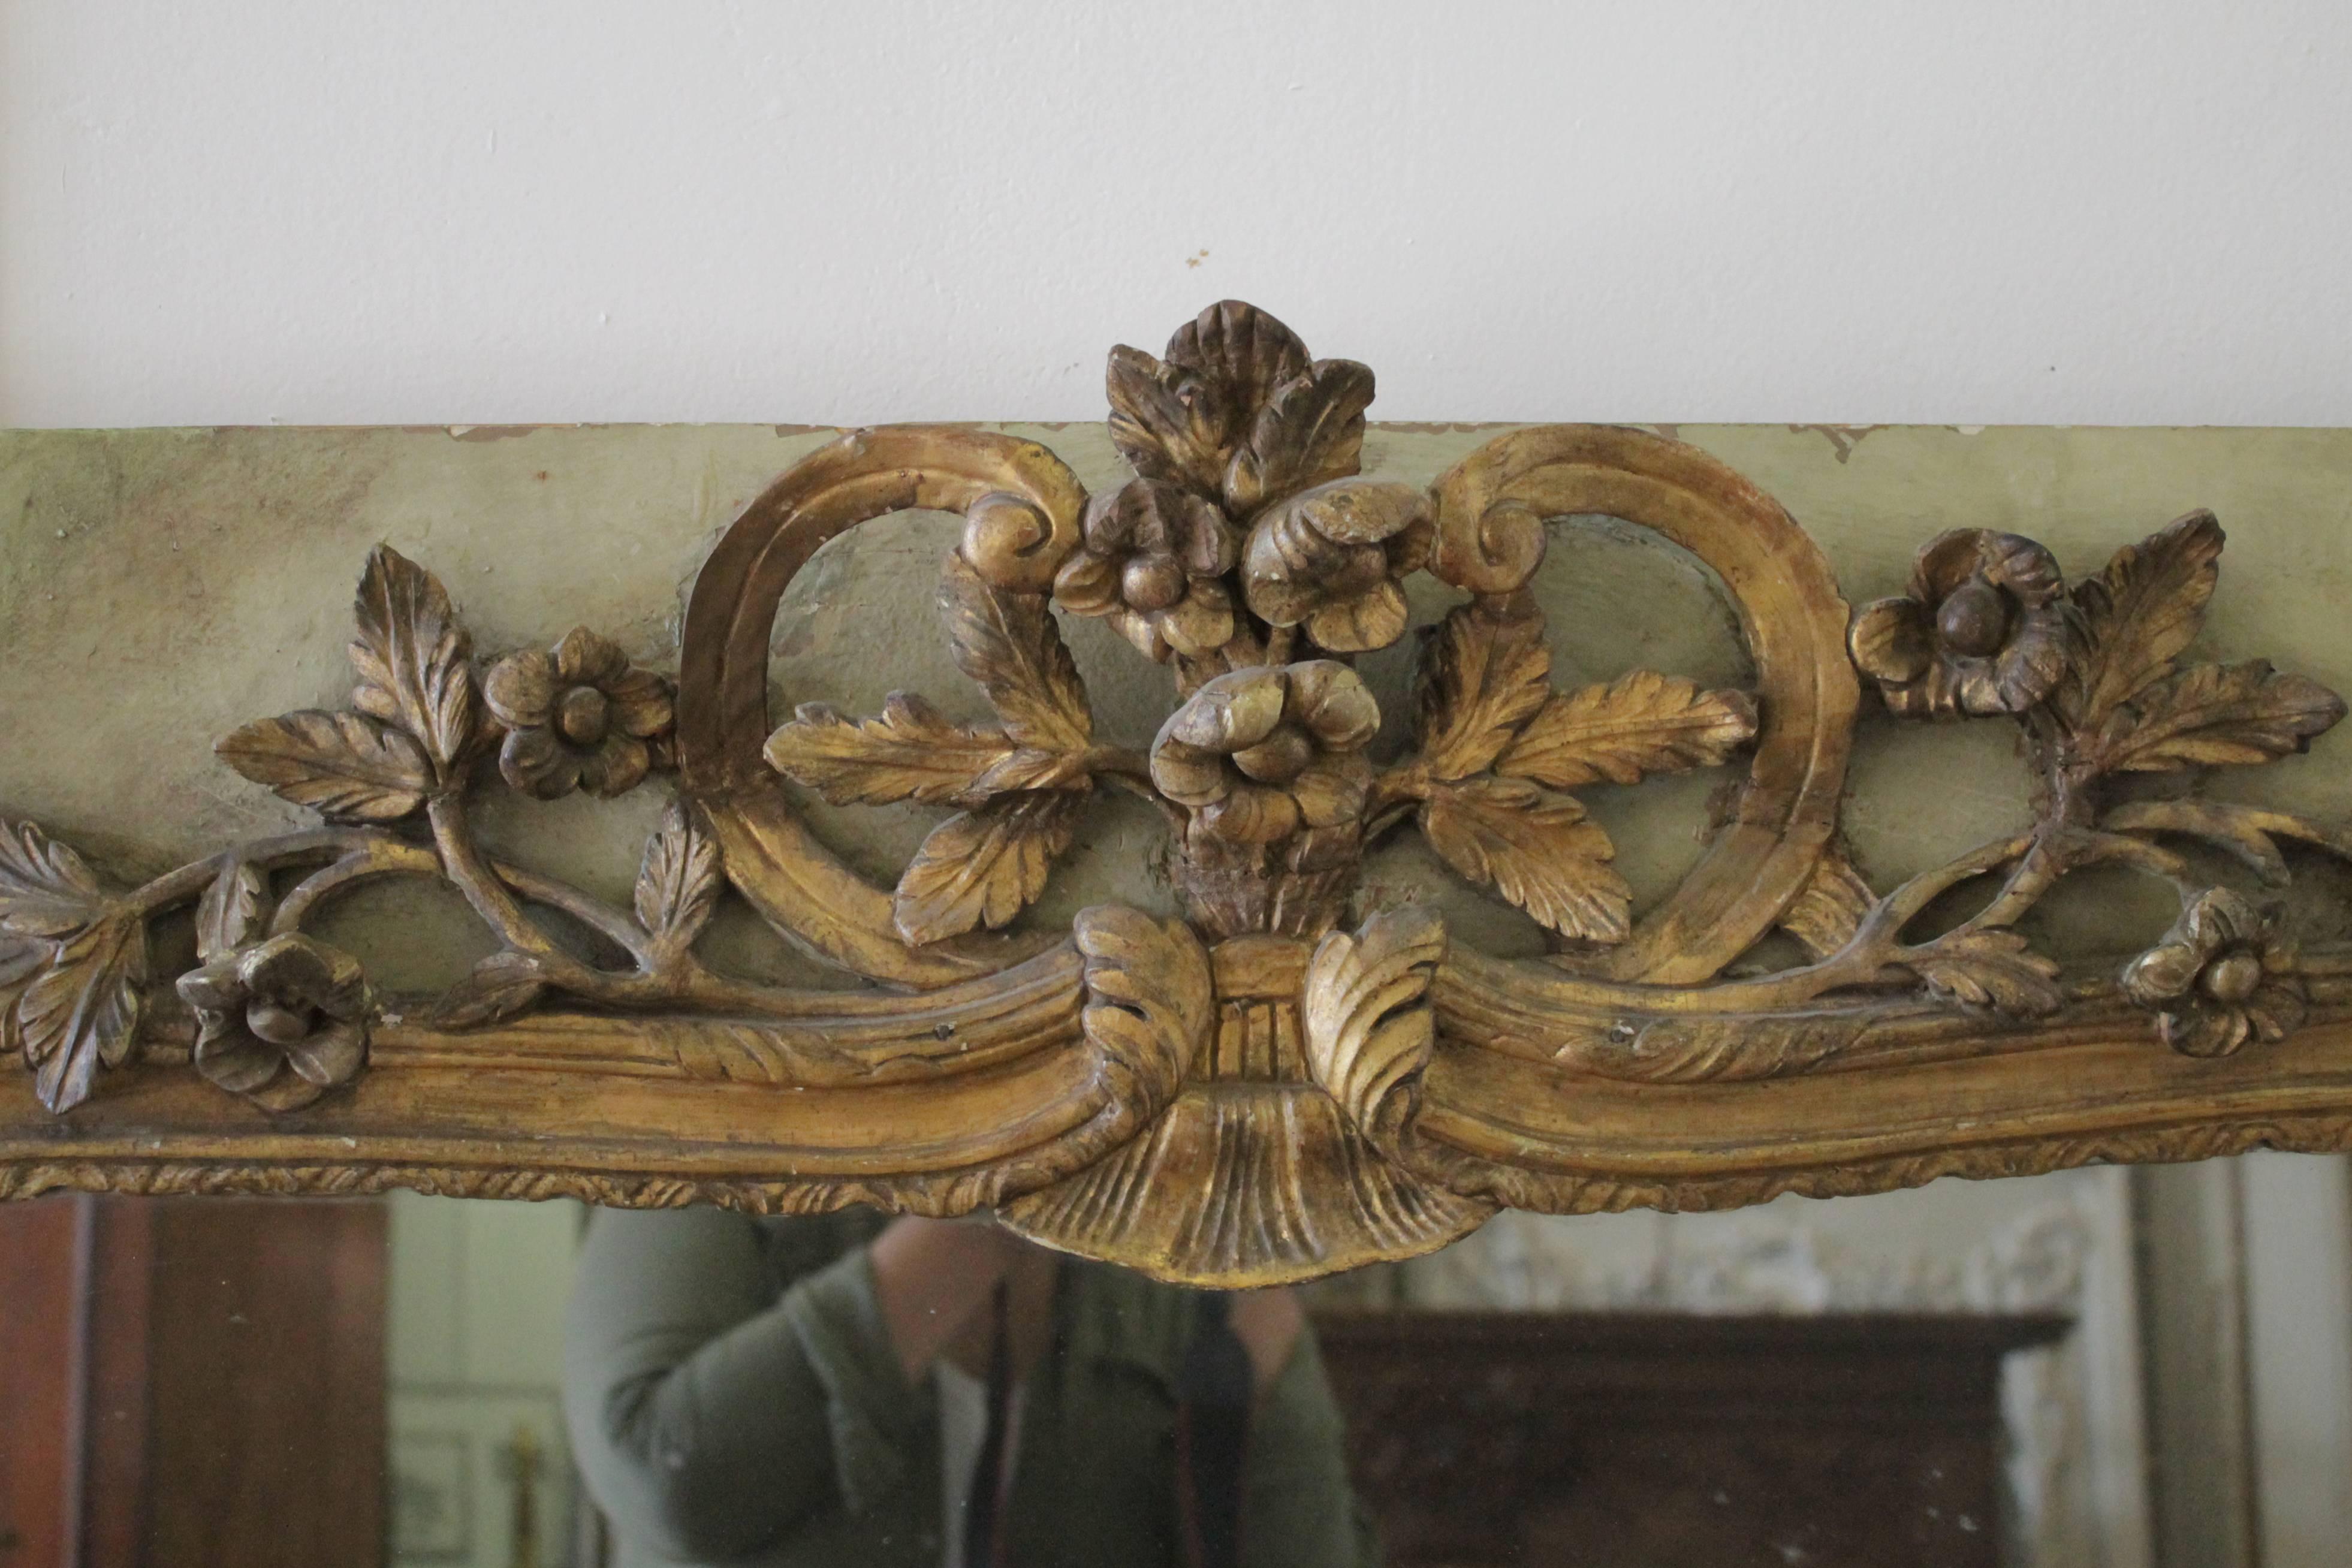 Gorgeous French trumeau with large carved roses and vines in a faded patina gilt finish. The wood frame has the original paint finish in a soft sage with creamy tones showing through. The mirror is original with signs of age, with fading, and dark